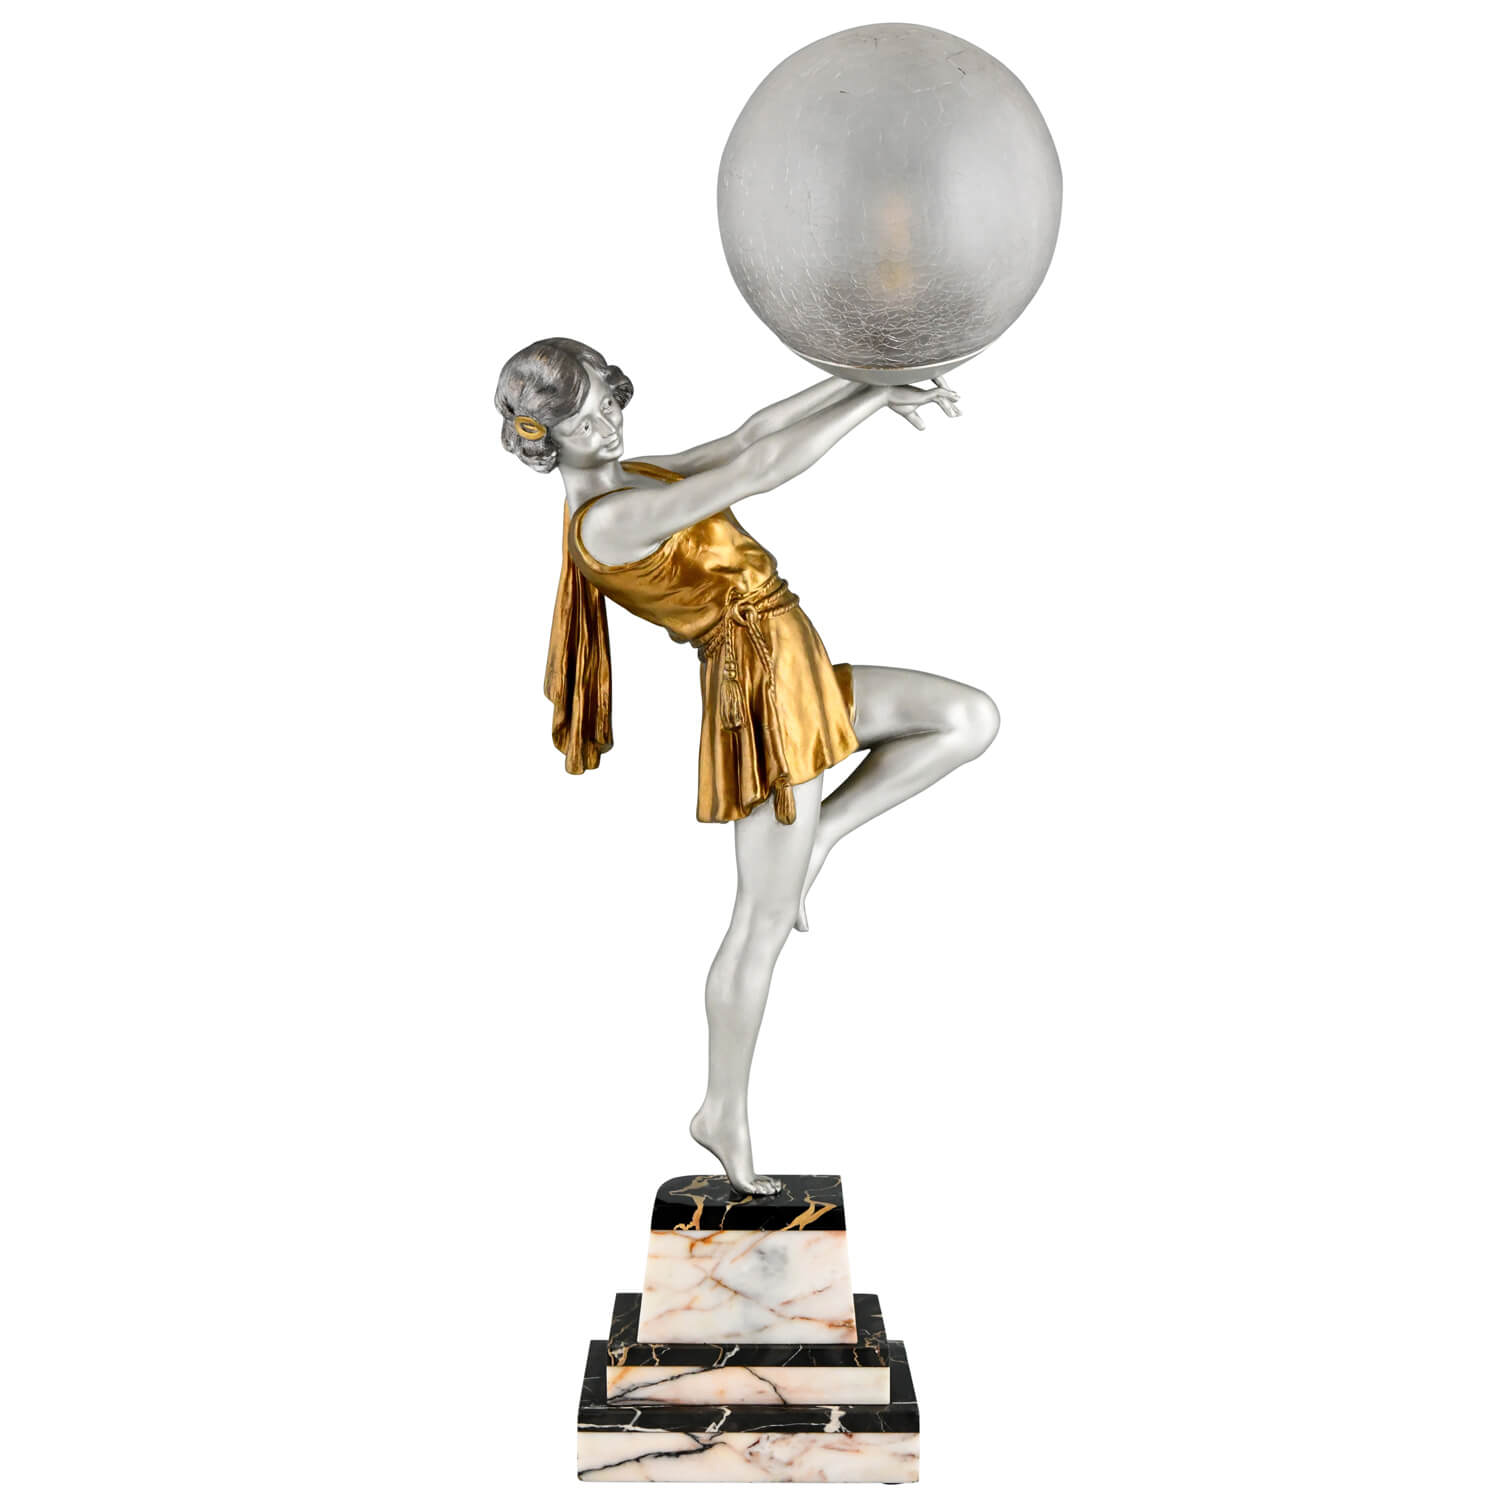 Art Deco lamp lady with ball - 1